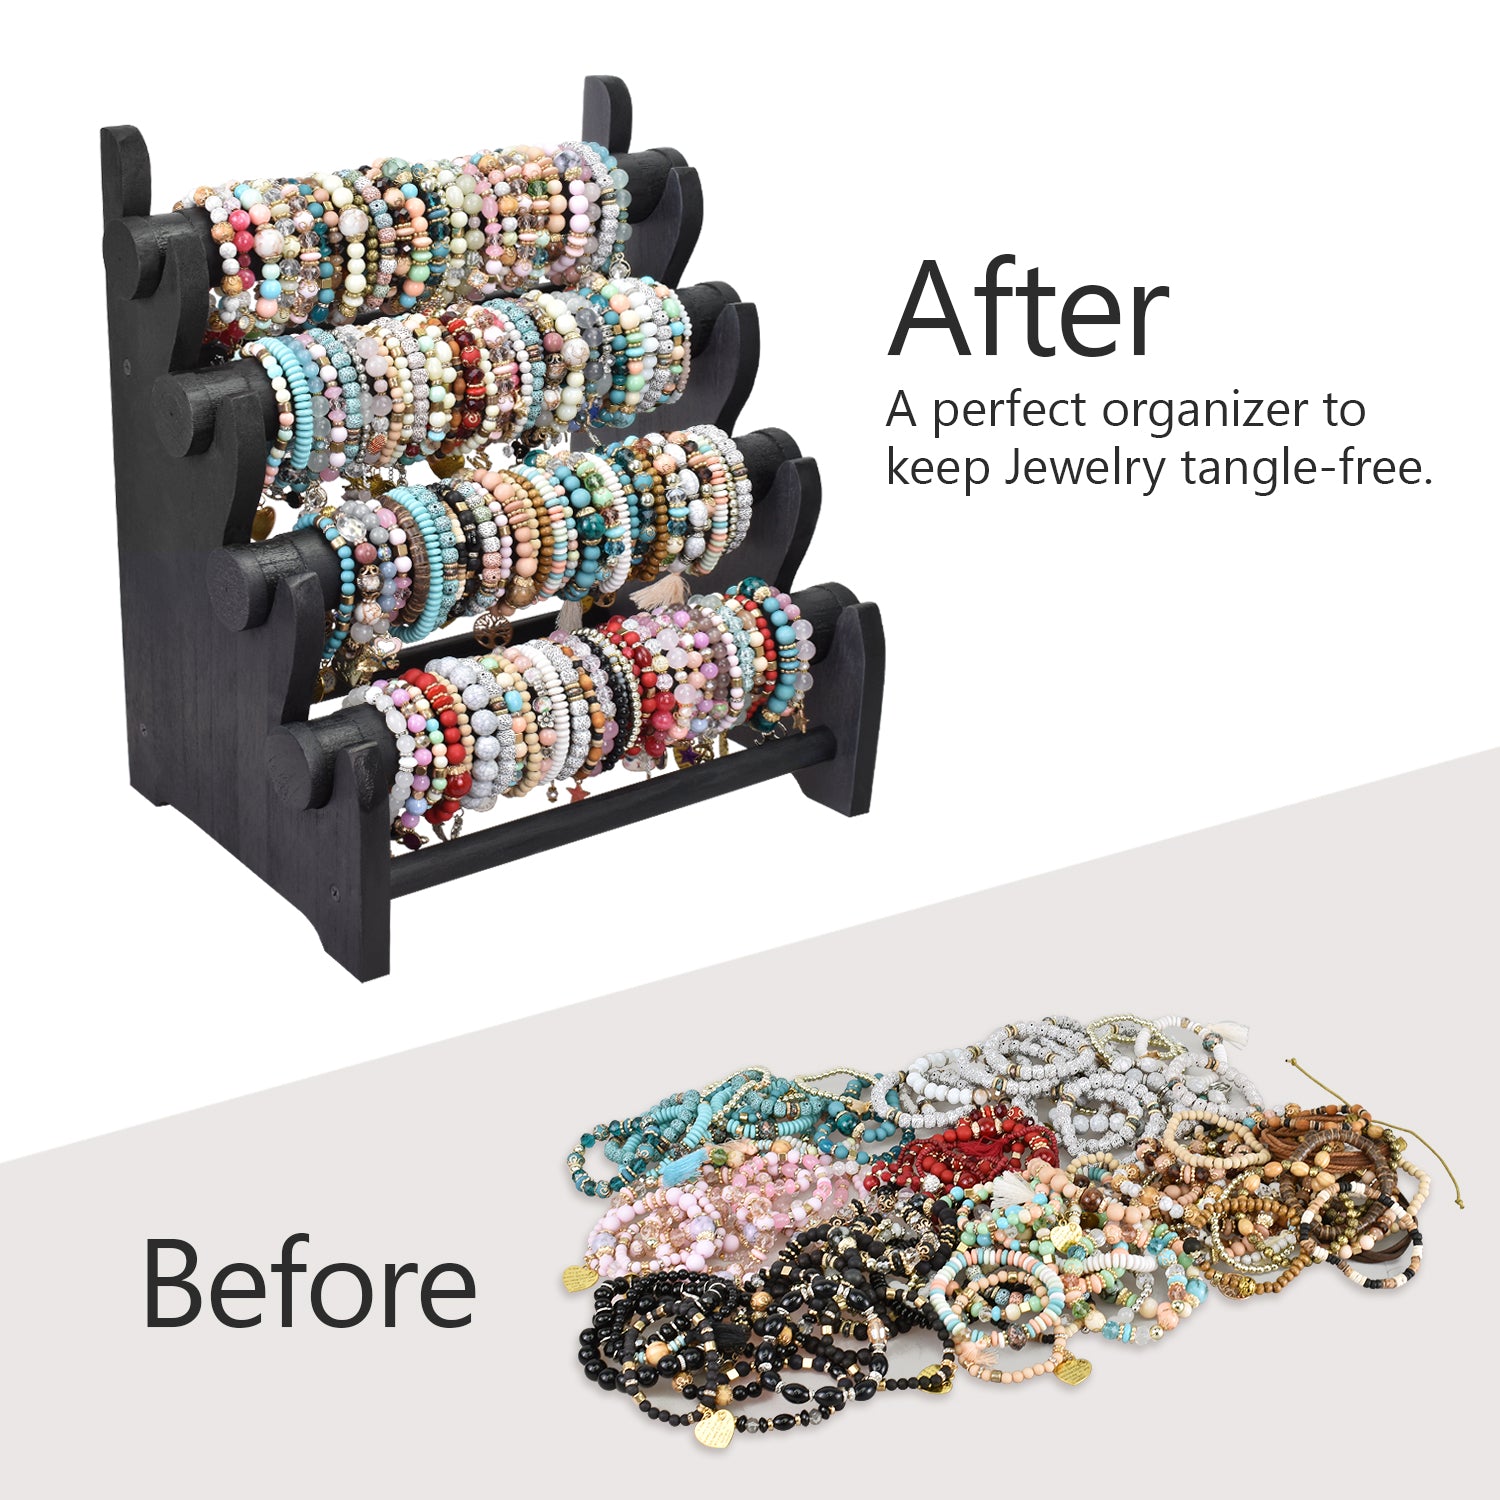  Ikee Design Wood Jewelry Holder Organizer Stand, Earring  Bracelet Jewelry Display Stands, Jewelry Organizer with 18 Hooks and  Removable Holders, Necklace Organizer, Bracelet Holder, Black Color :  Clothing, Shoes & Jewelry